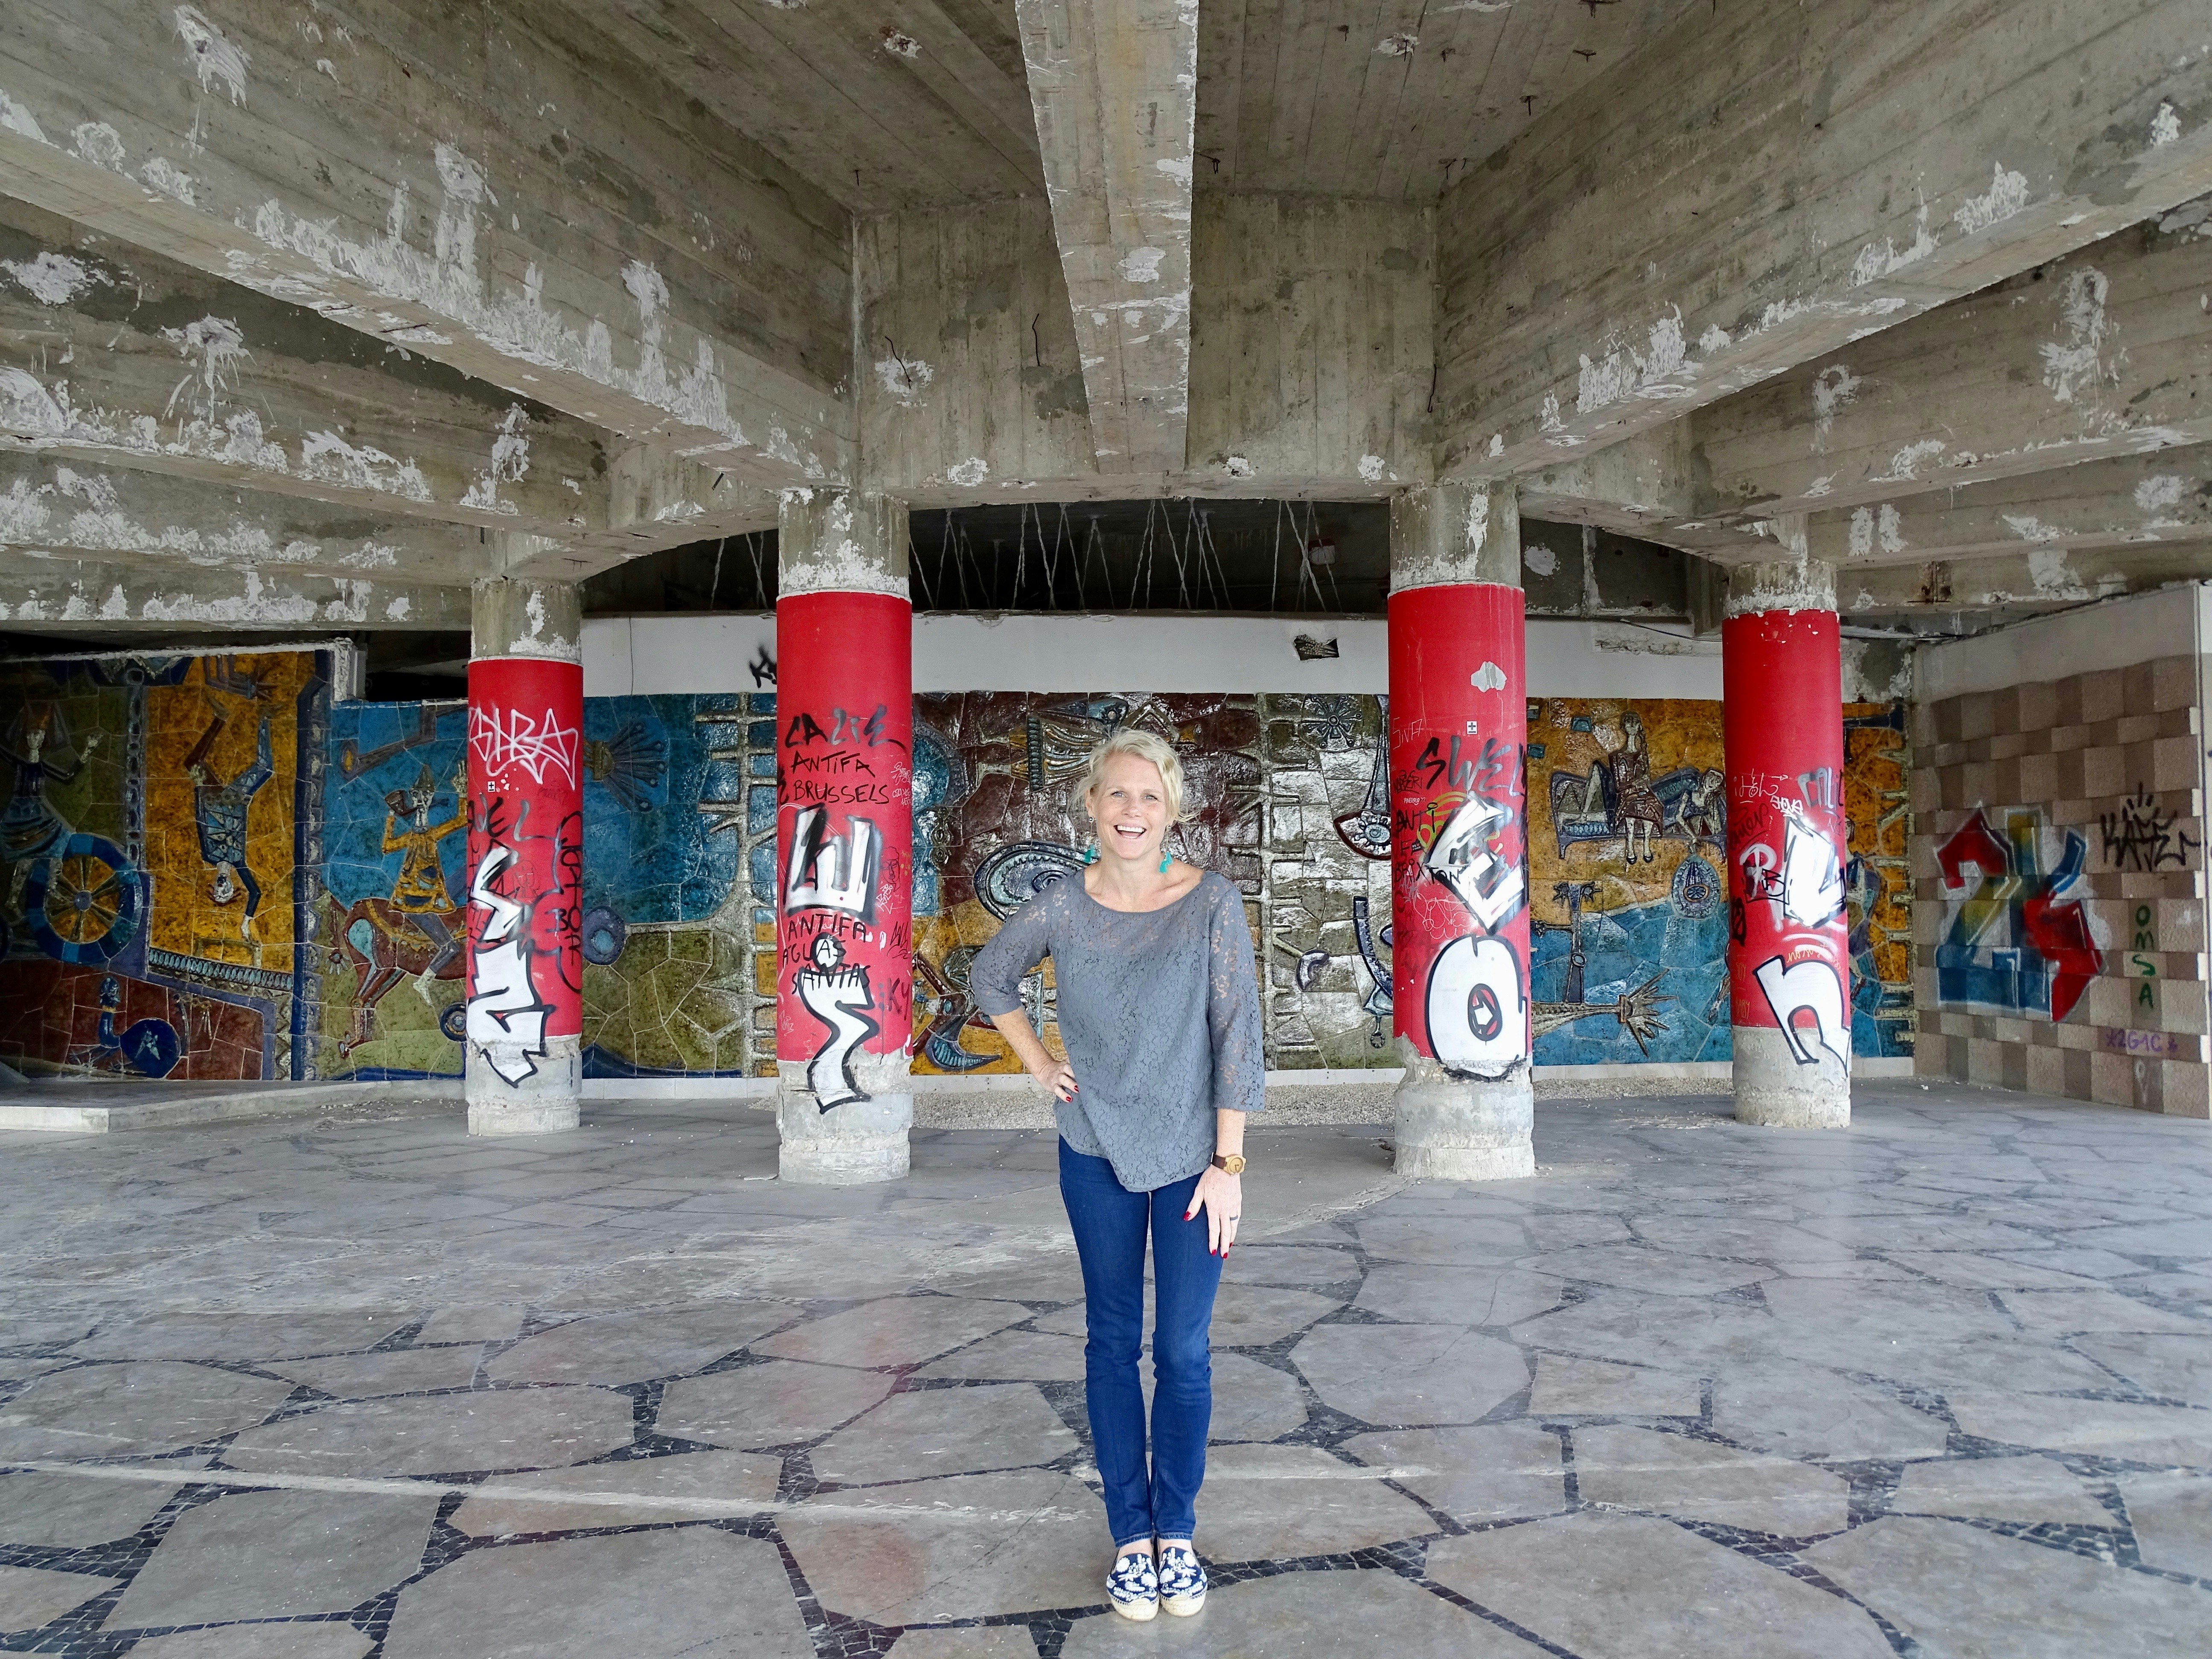 A woman poses smiling in front of graffitied columns in the Miradouro Panoramico de Monsanto, Lisbon. 